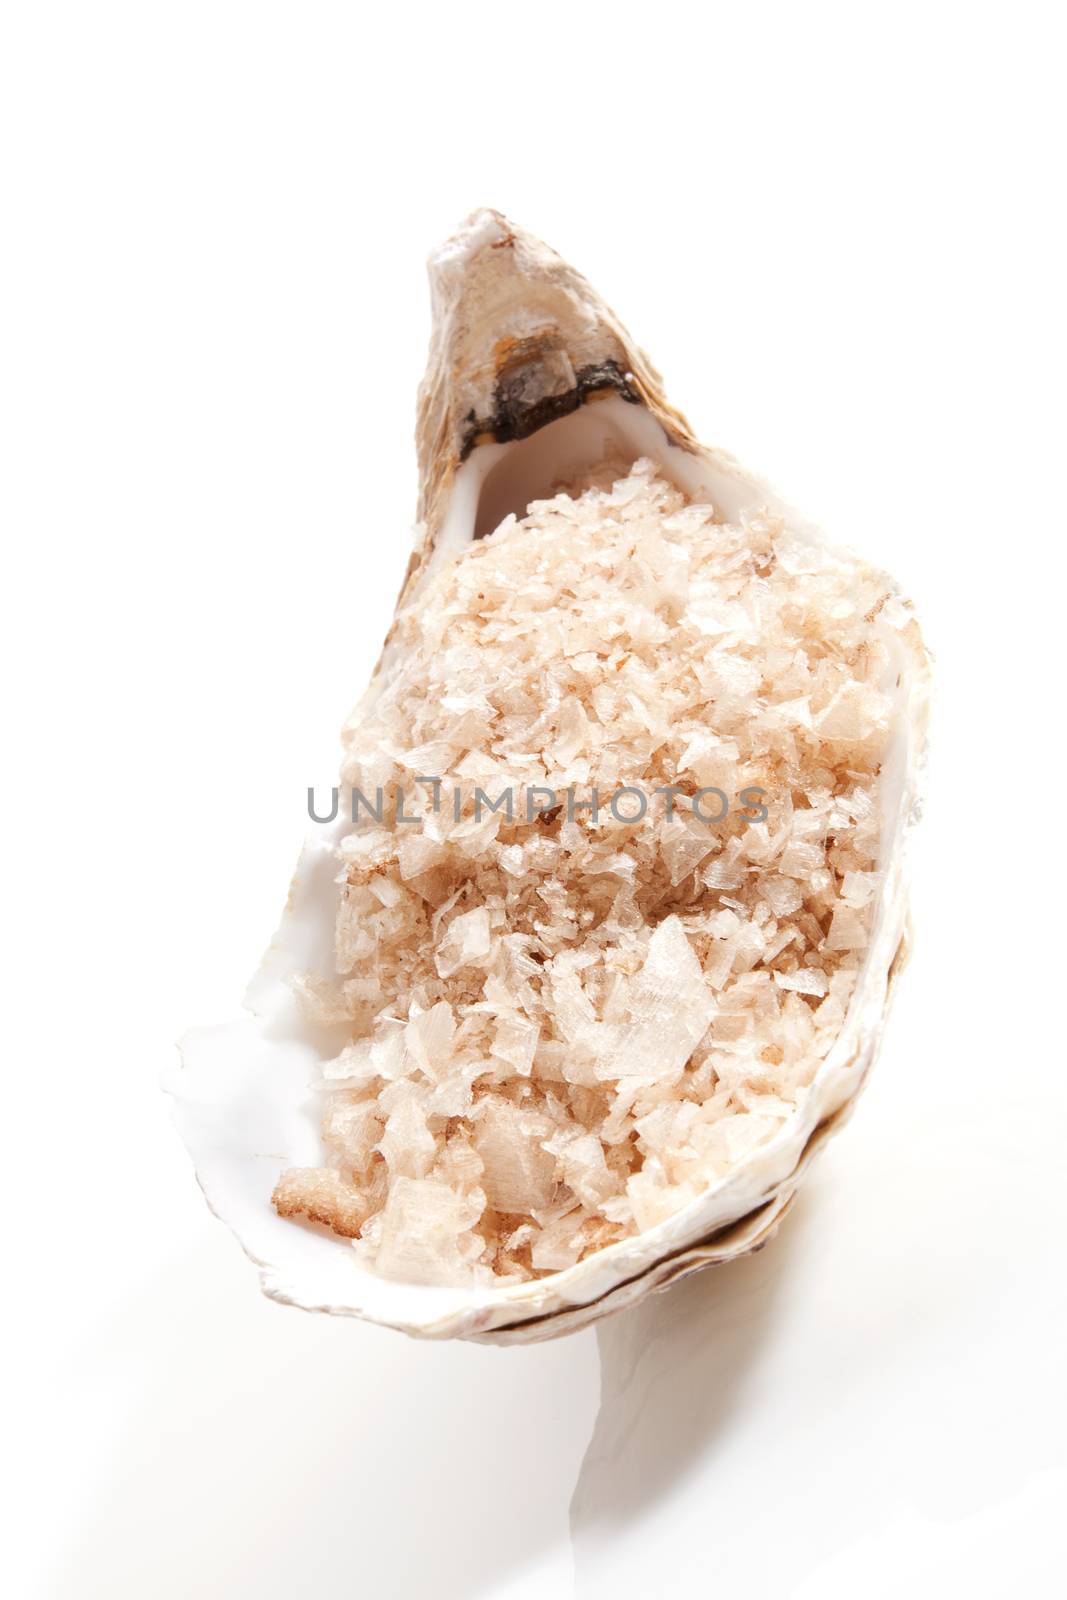 Sea salt crystals in seashell isolated on white background. Natural wellness spa treatment concept.